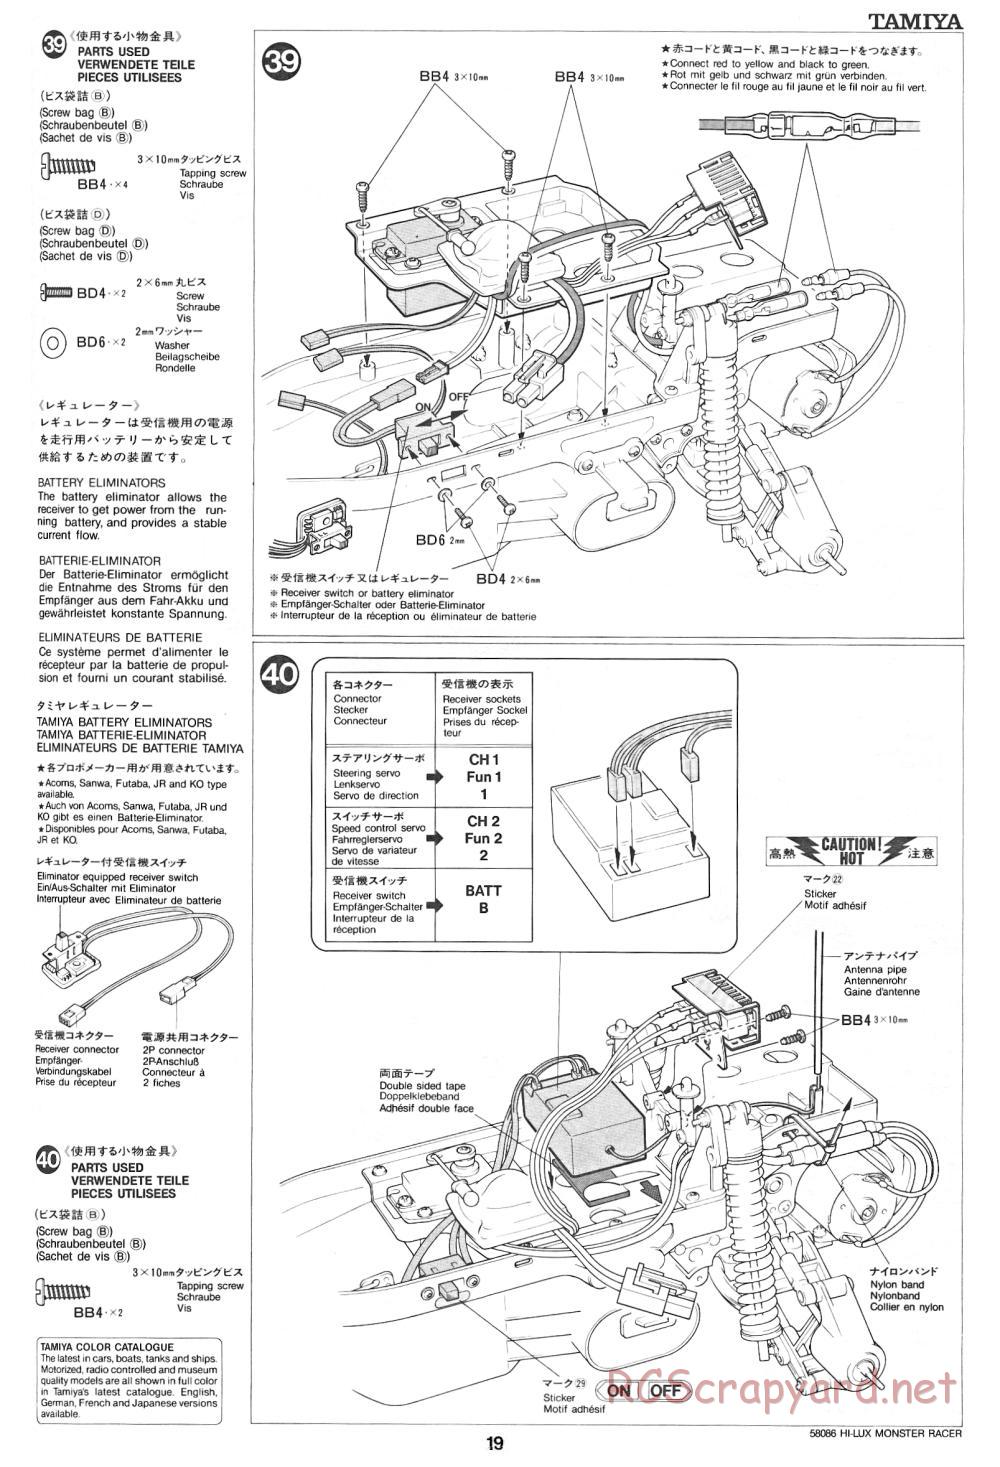 Tamiya - Toyota Hilux Monster Racer - 58086 - Manual - Page 19